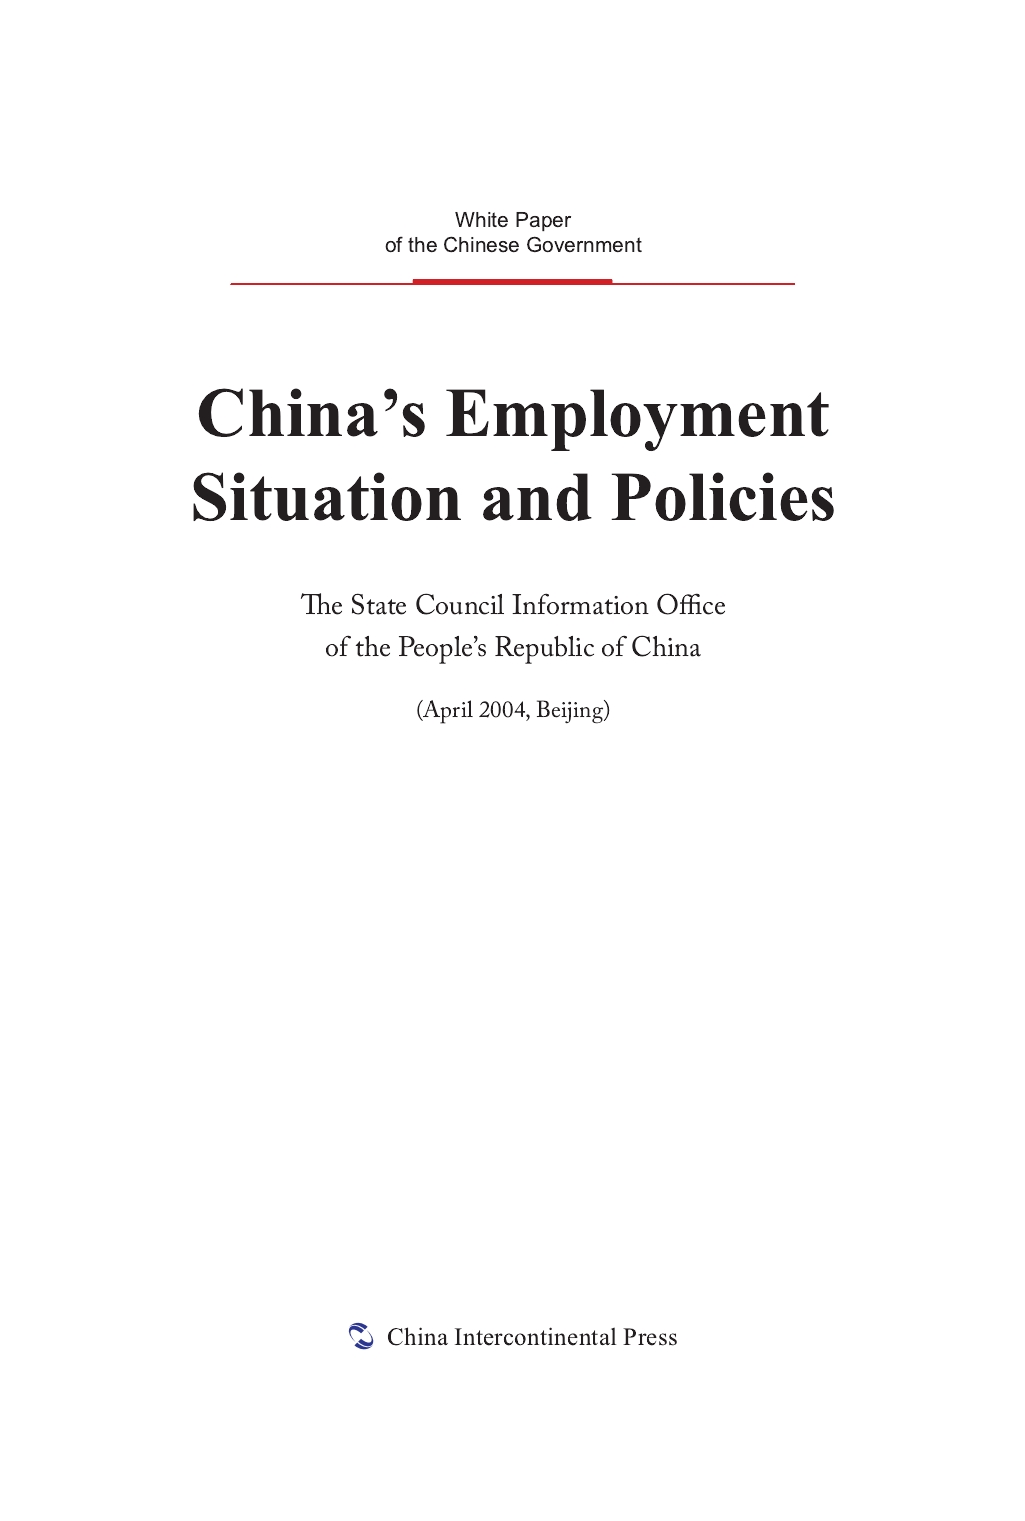 China's Employment Situation and Policies